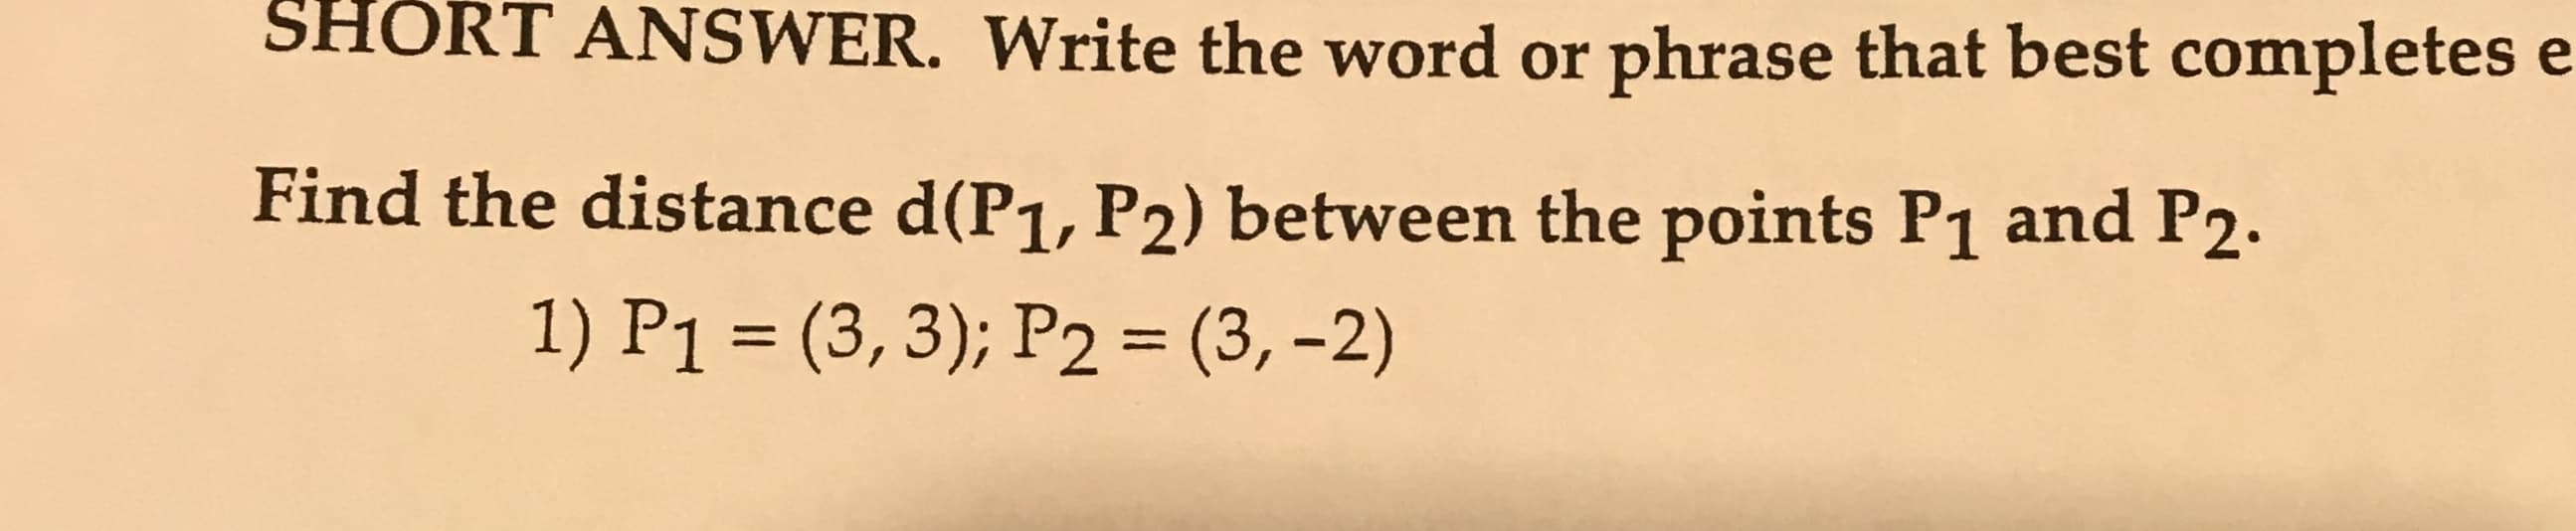 SHORT
ANSWER. Write the word or phrase that best completes e
Find the distance d(P1, P2) between the points P1 and P2.
1) P1 (3, 3); P2 (3,-2)
